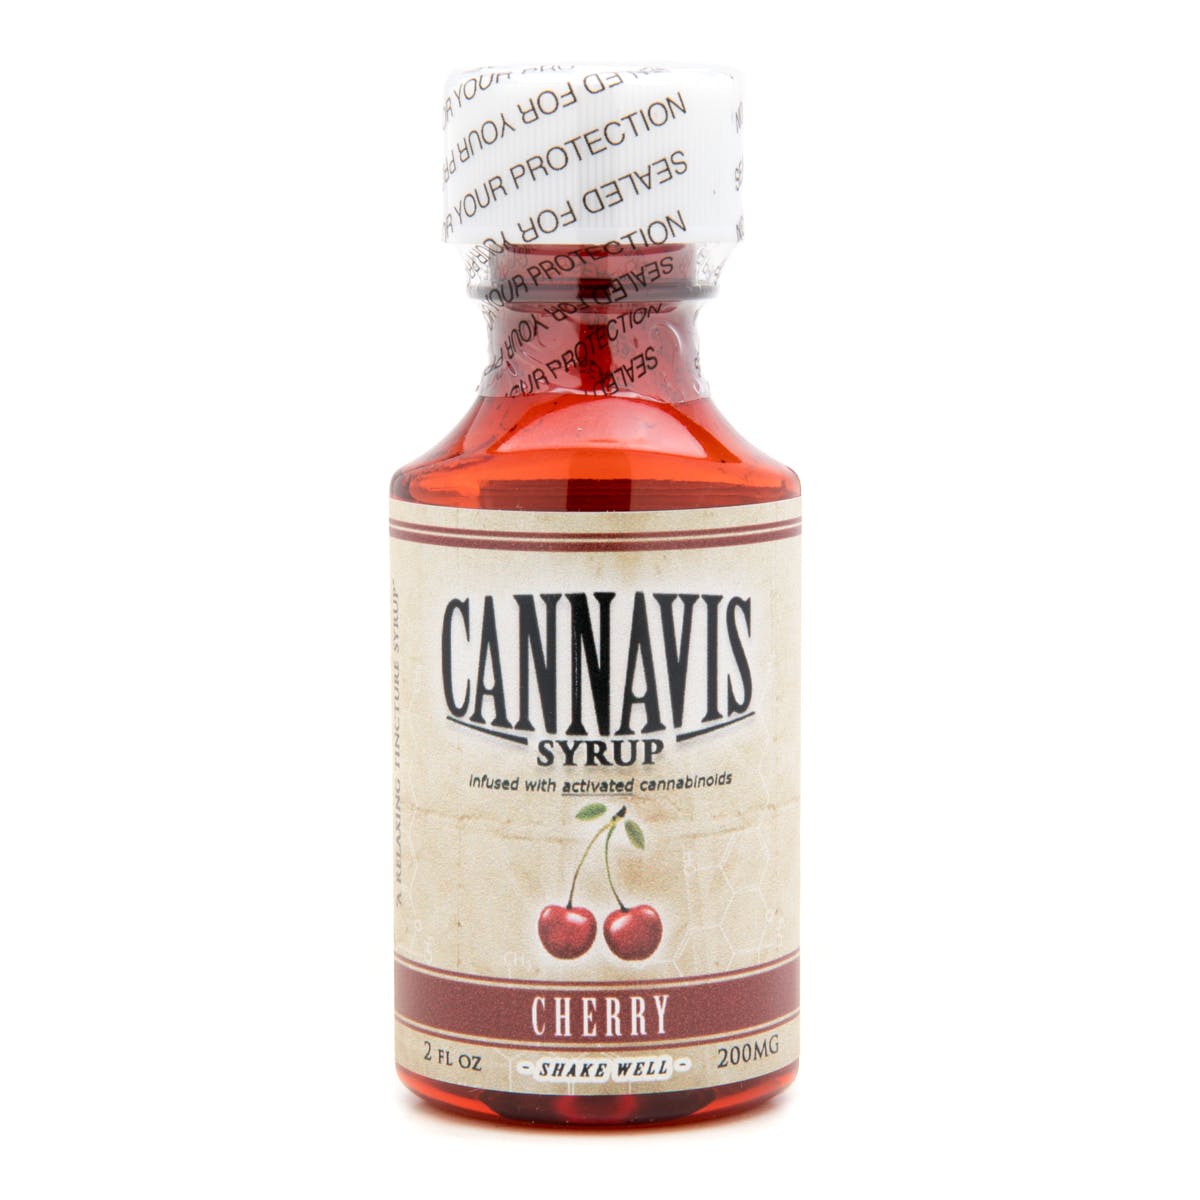 marijuana-dispensaries-church-of-holy-fire-in-city-of-industry-cannavis-syrup-2c-cherry-200mg